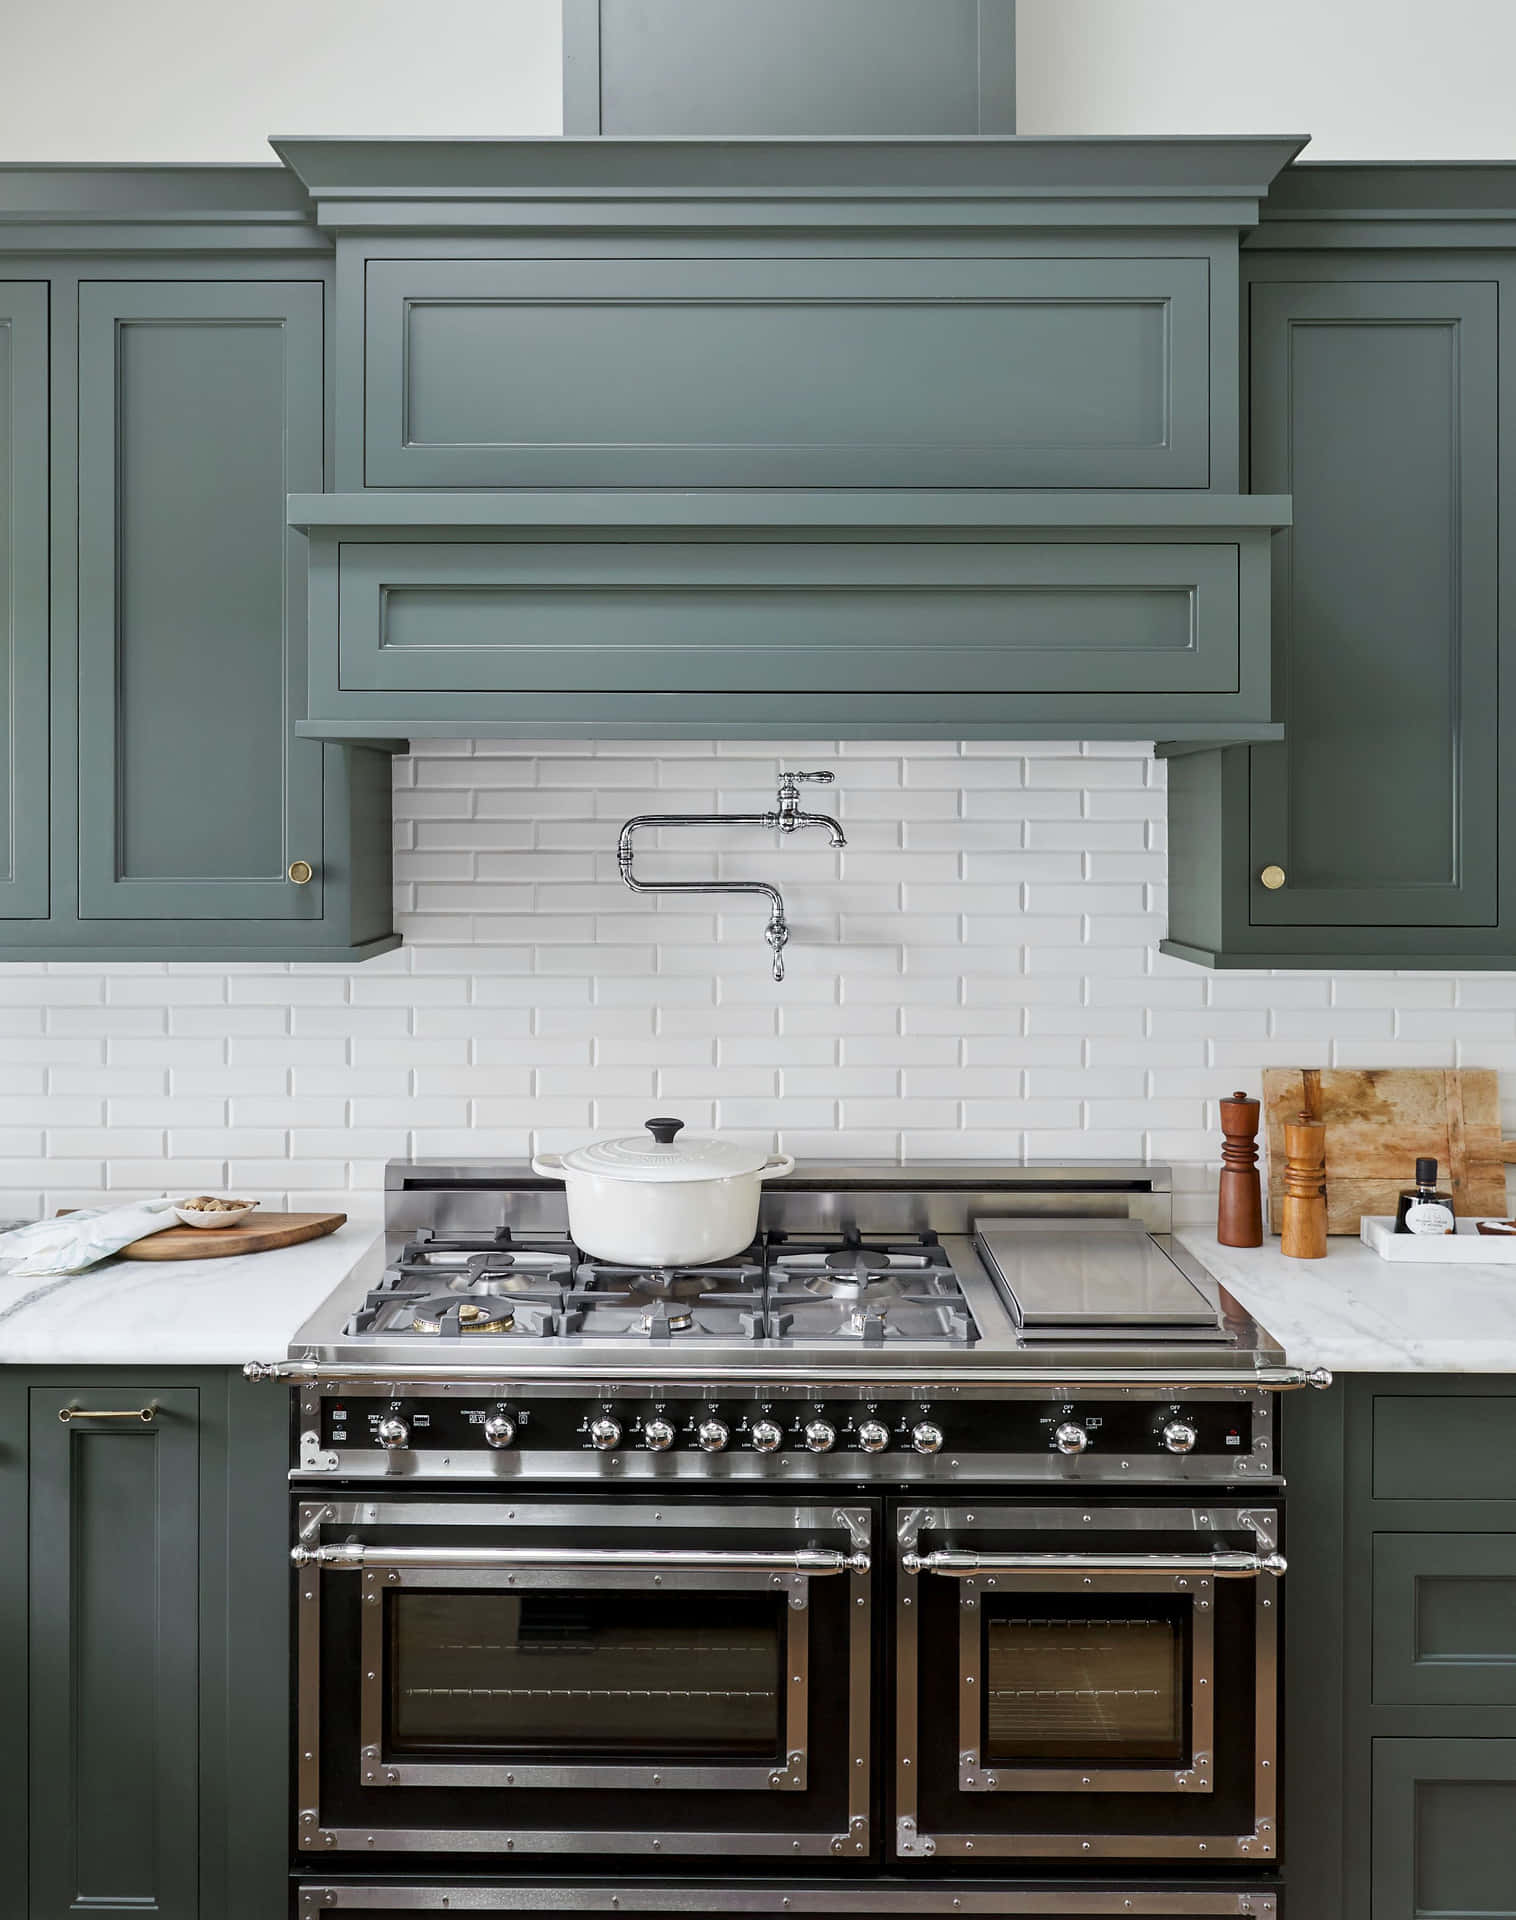 "Cooking with Style: A Stainless Steel Stove in a Modern Kitchen"